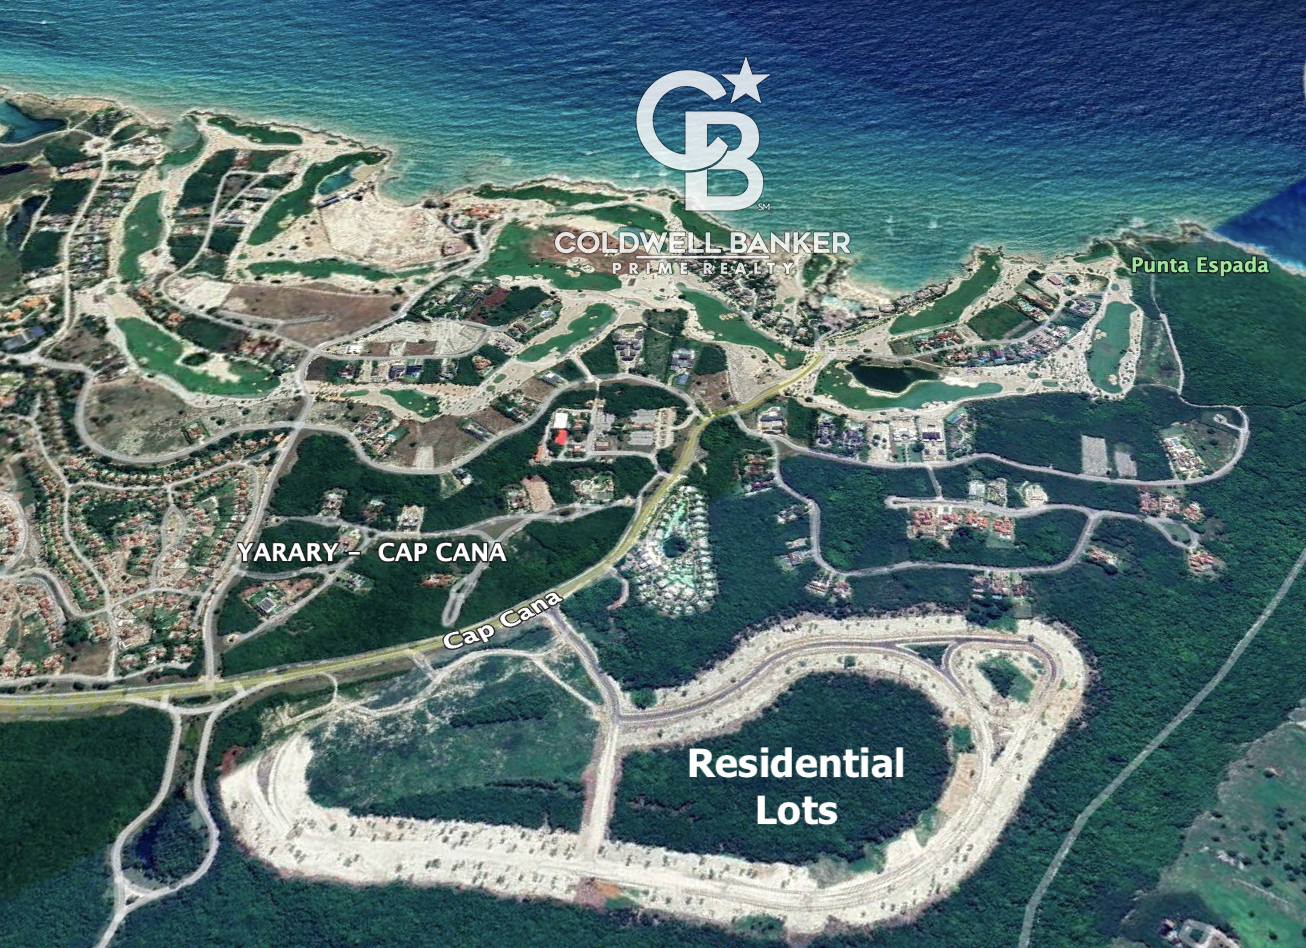 Gorgeous Cap Cana Residential Lots Minutes Away From the Spectacular Beaches